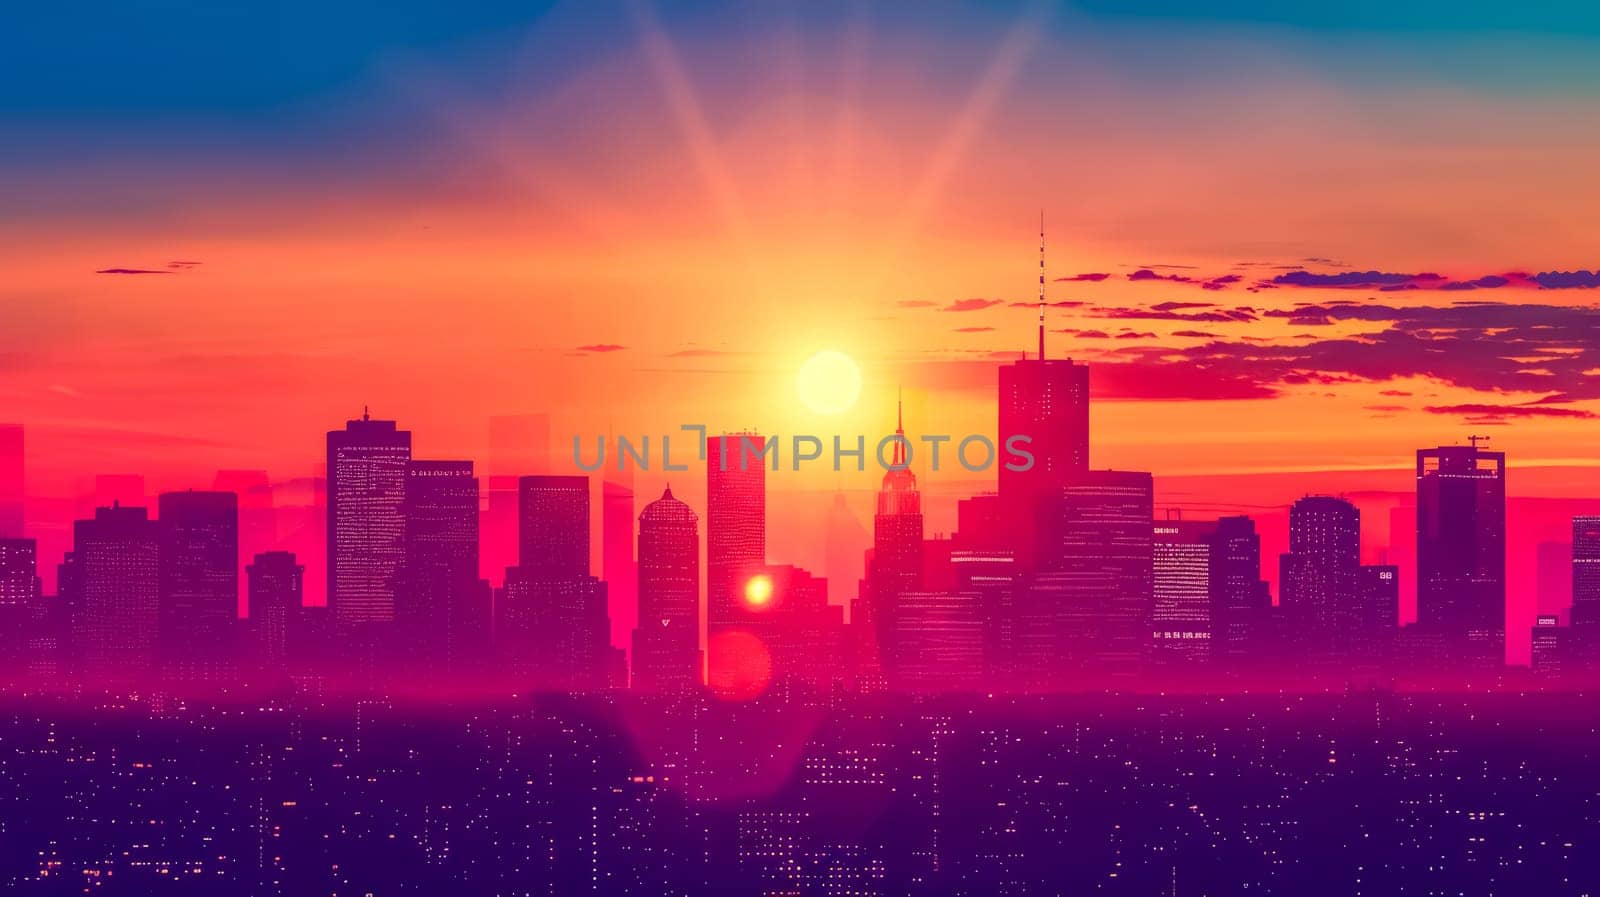 Panoramic view of a city skyline basked in the warm hues of a setting sun